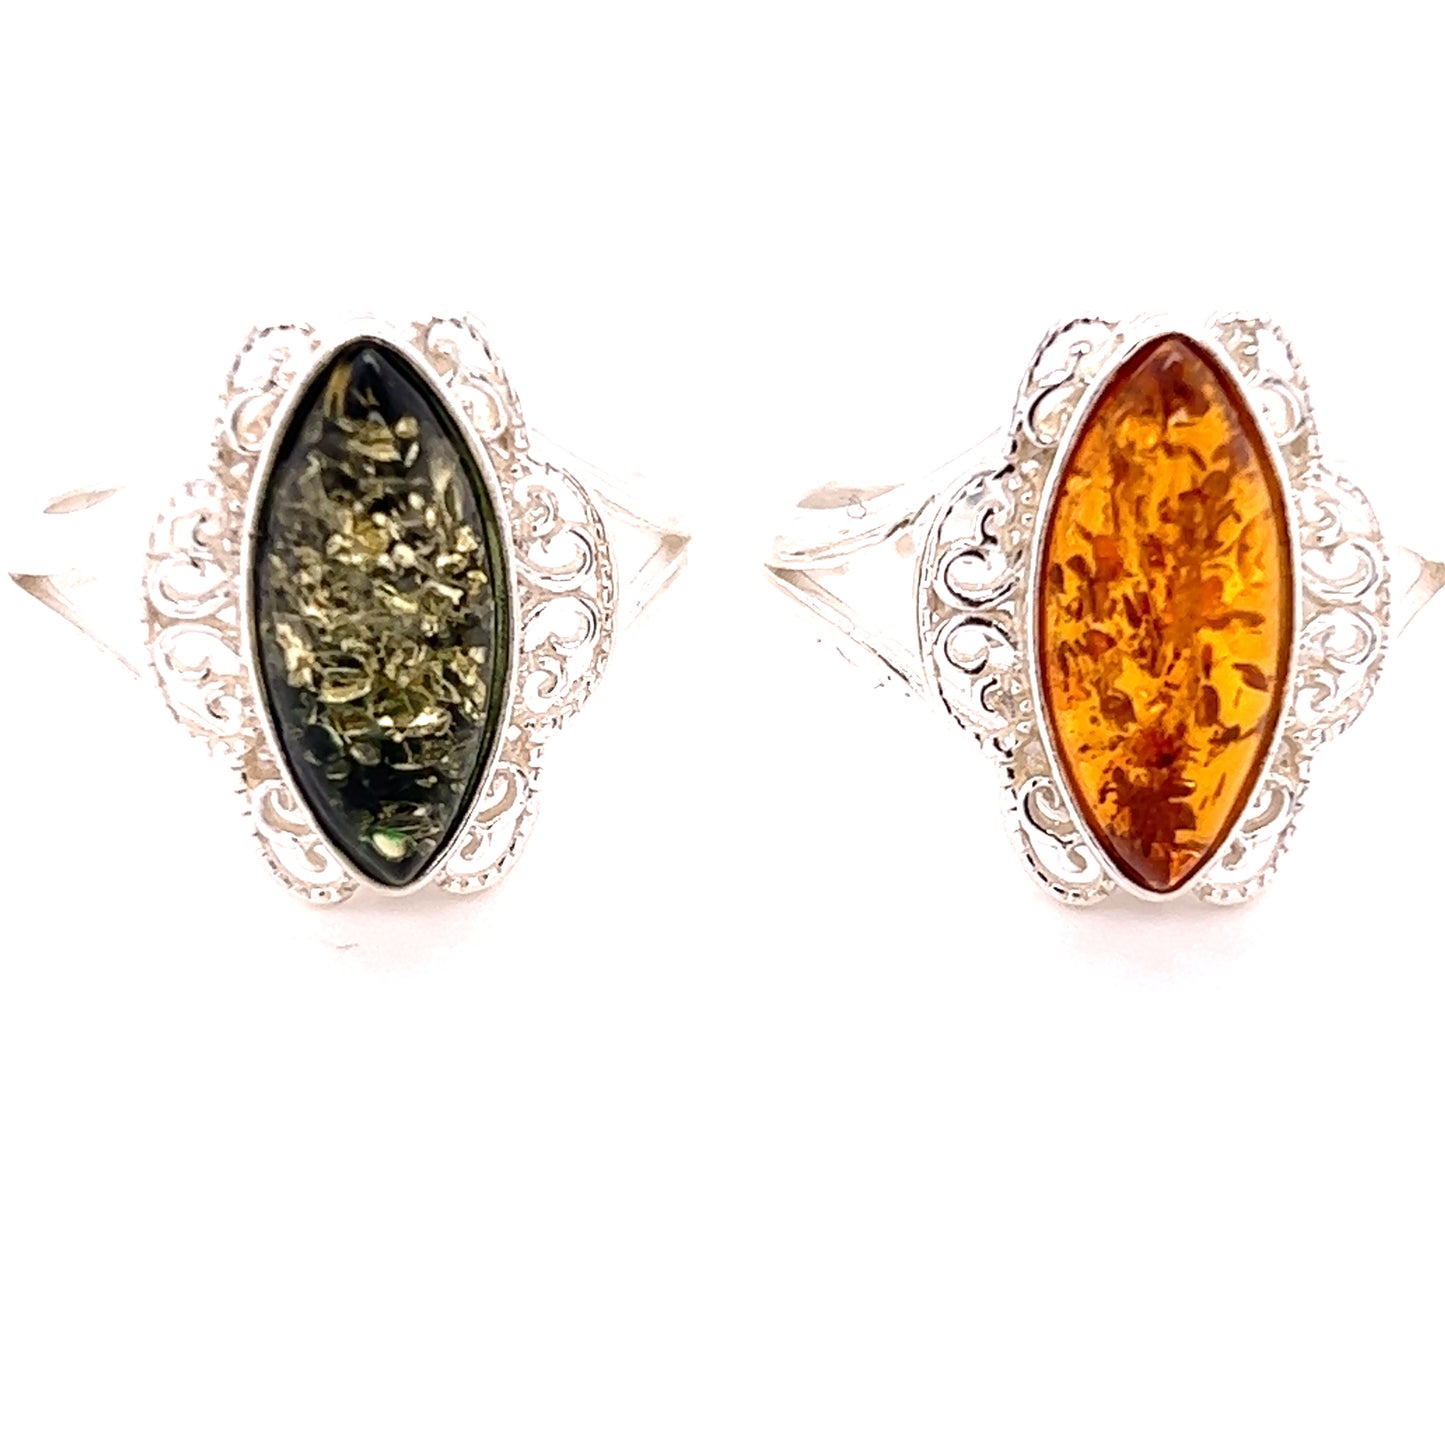 Two silver rings featuring marquise-cut gemstones, one with a greenish stone and the other with an orange Baltic amber stone, both set in intricate Filigree Marquise Shaped Adjustable Amber Rings.